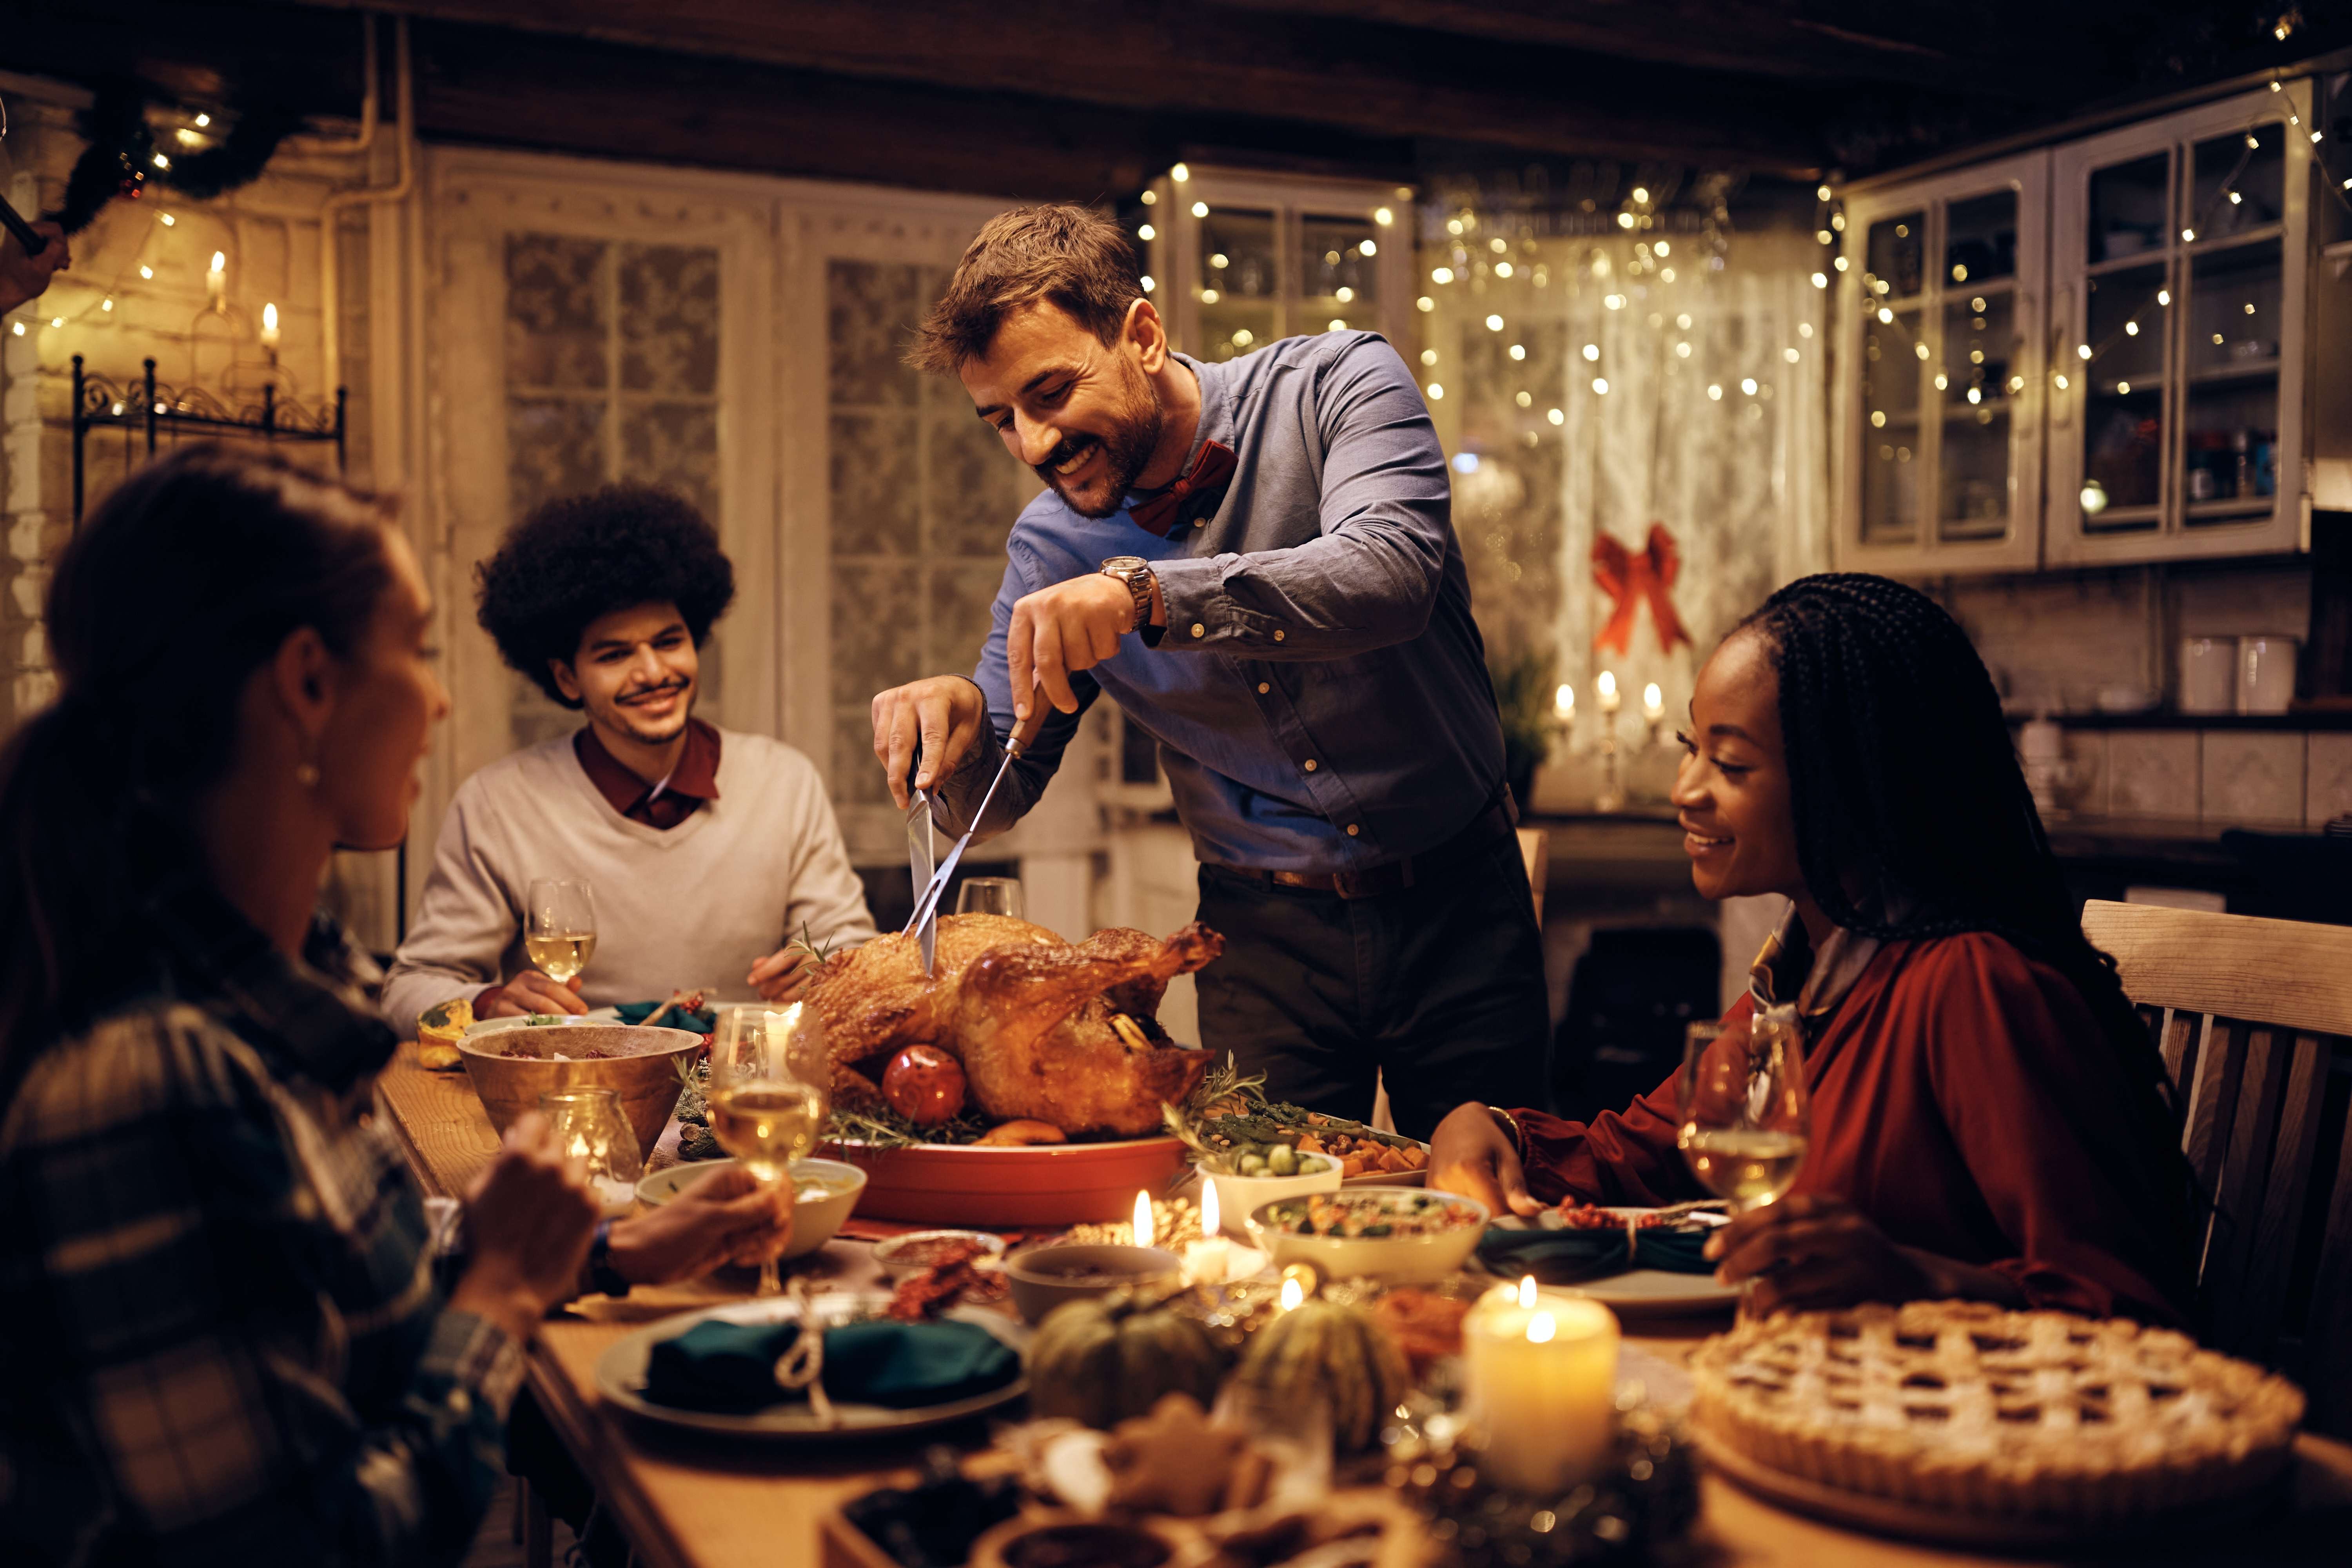 A thoughtful host carves the Thanksgiving turkey for his family at the dinner table.